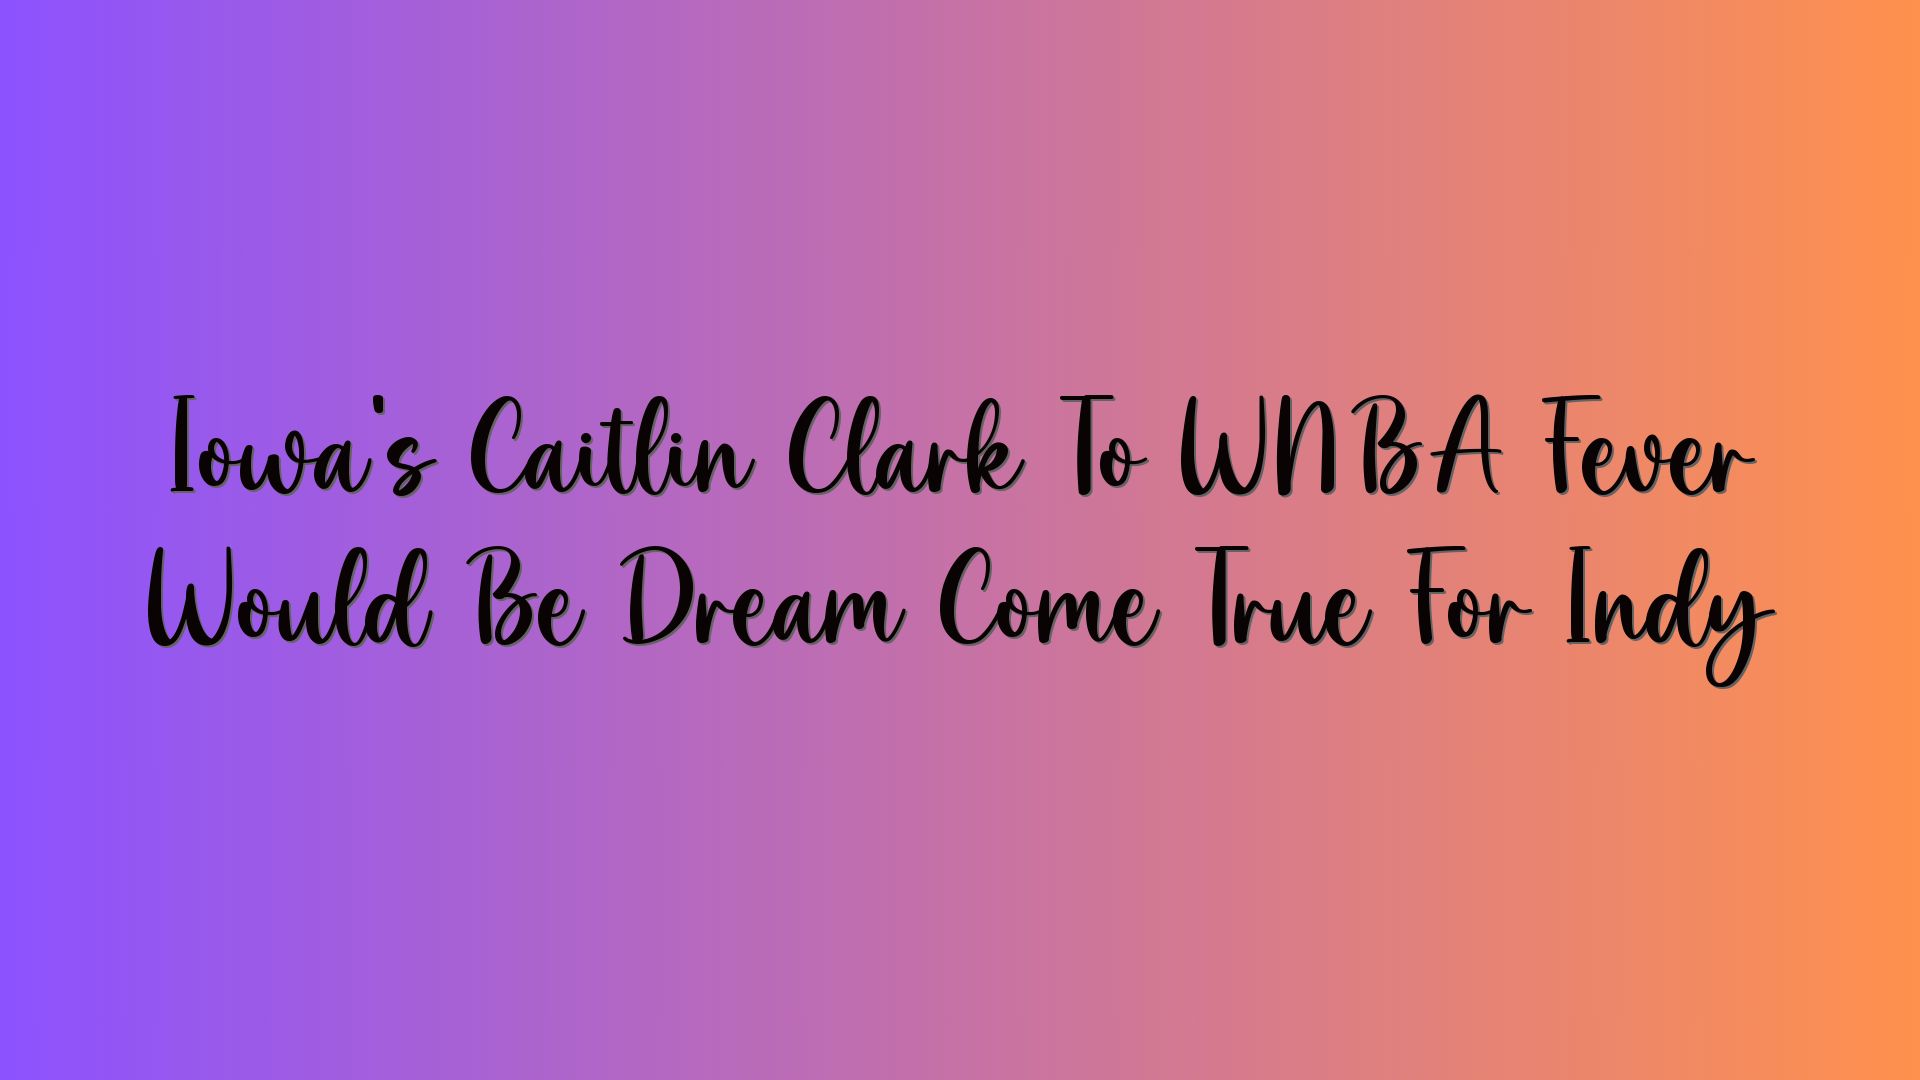 Iowa’s Caitlin Clark To WNBA Fever Would Be Dream Come True For Indy